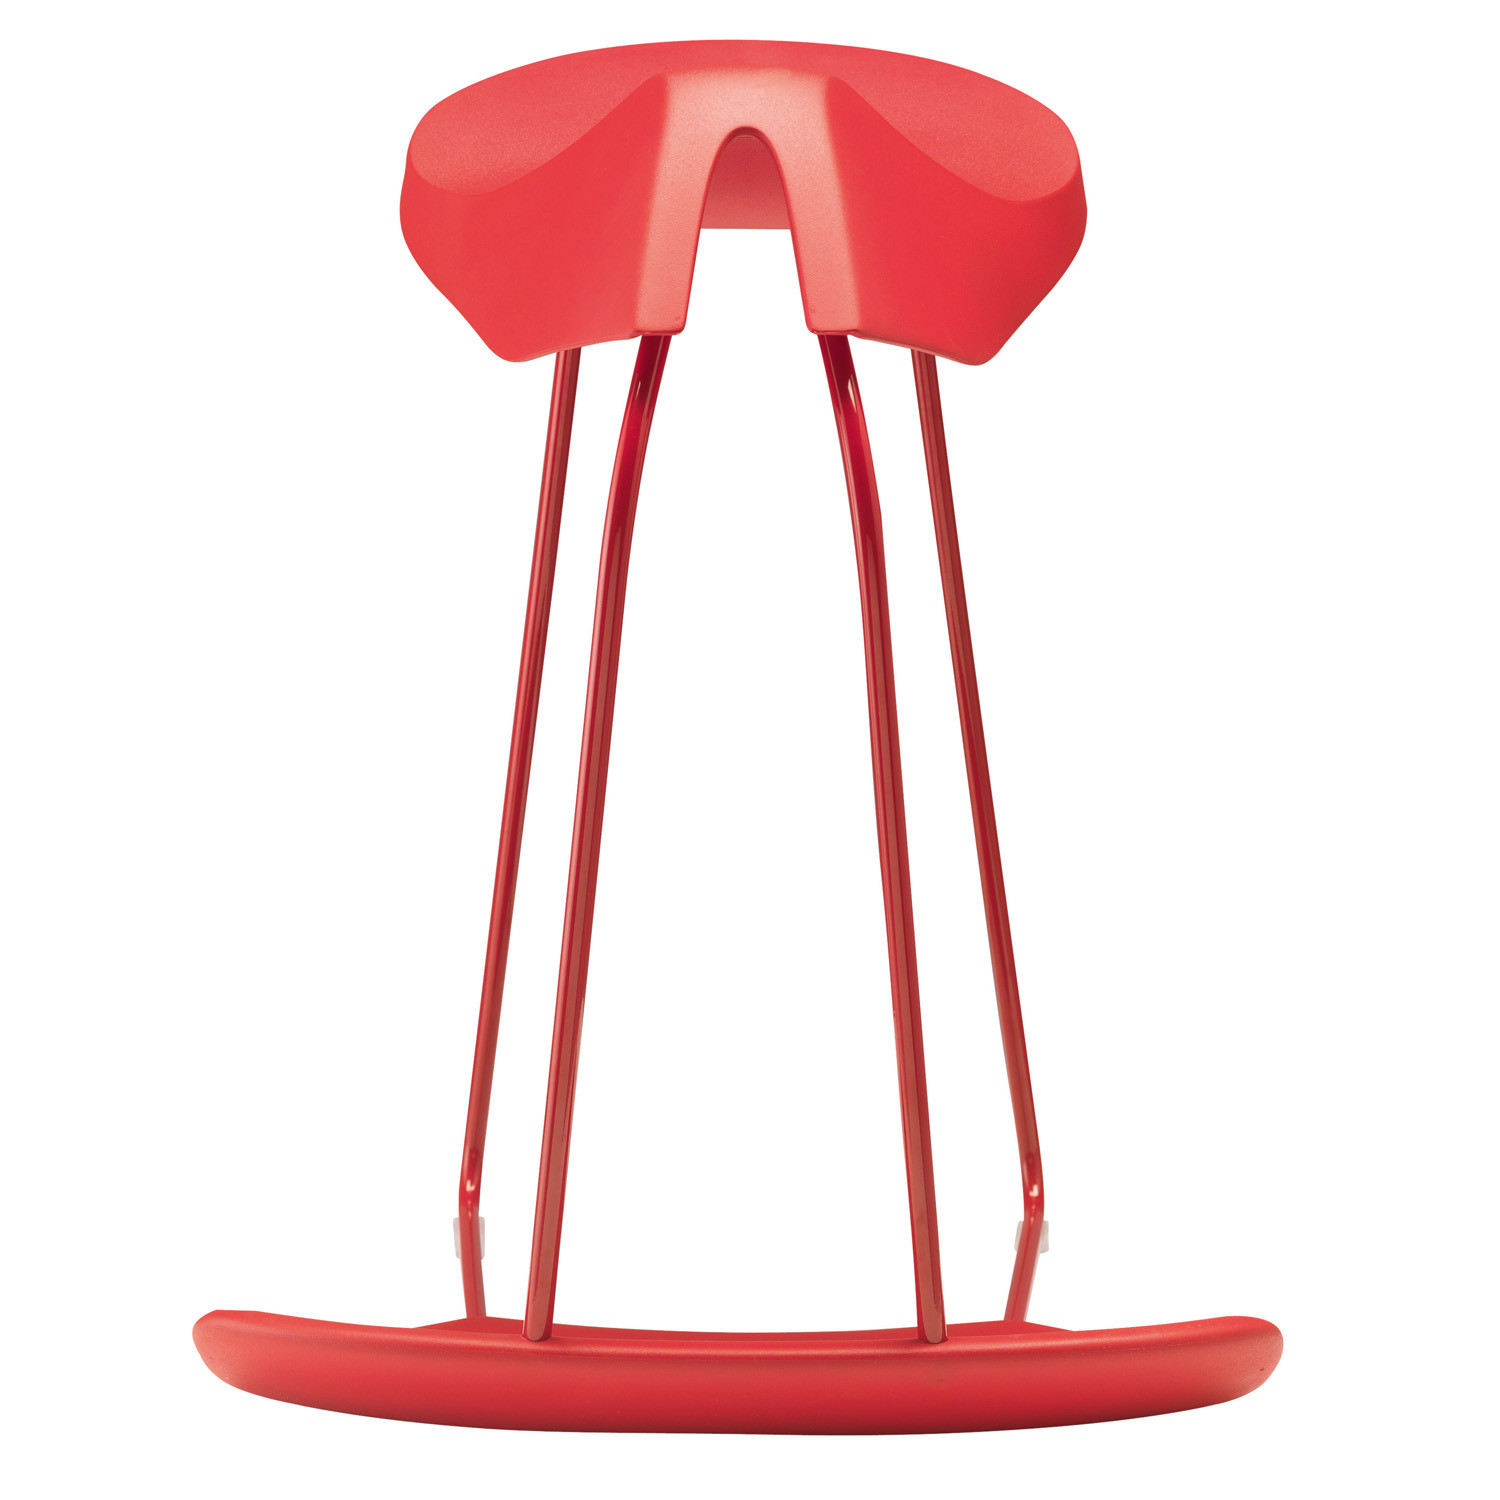 Dinamica Stool in red - Alias